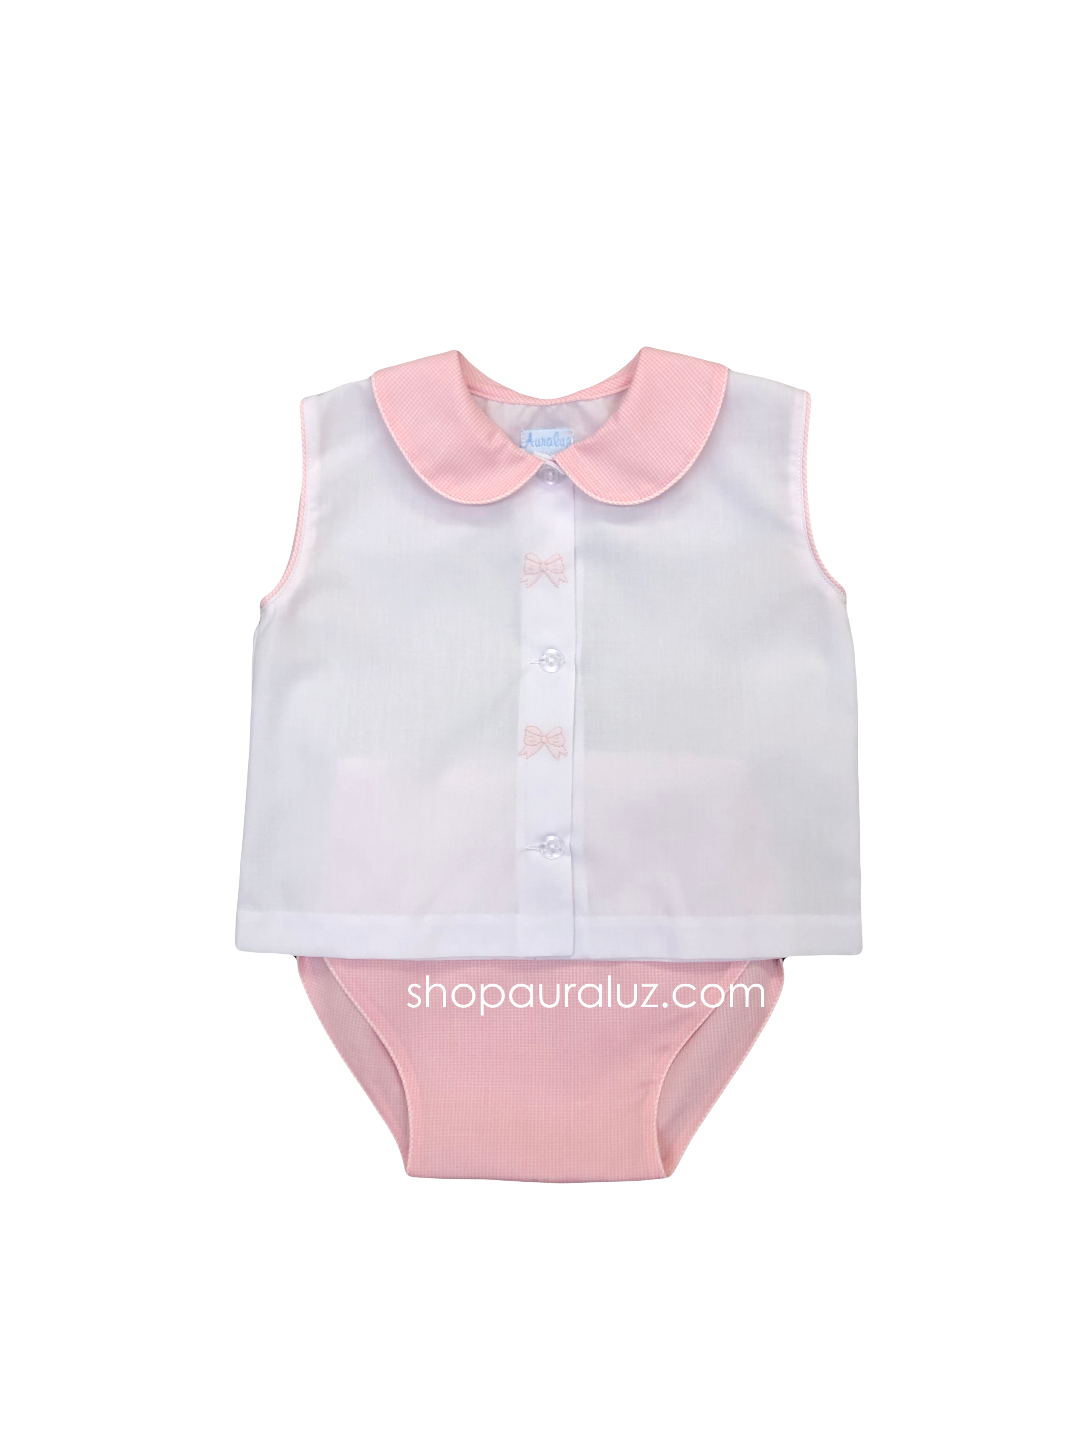 Auraluz Sleeveless Diaper shirt/cover set...White with pink check collar/diaper cover and embroidered bows